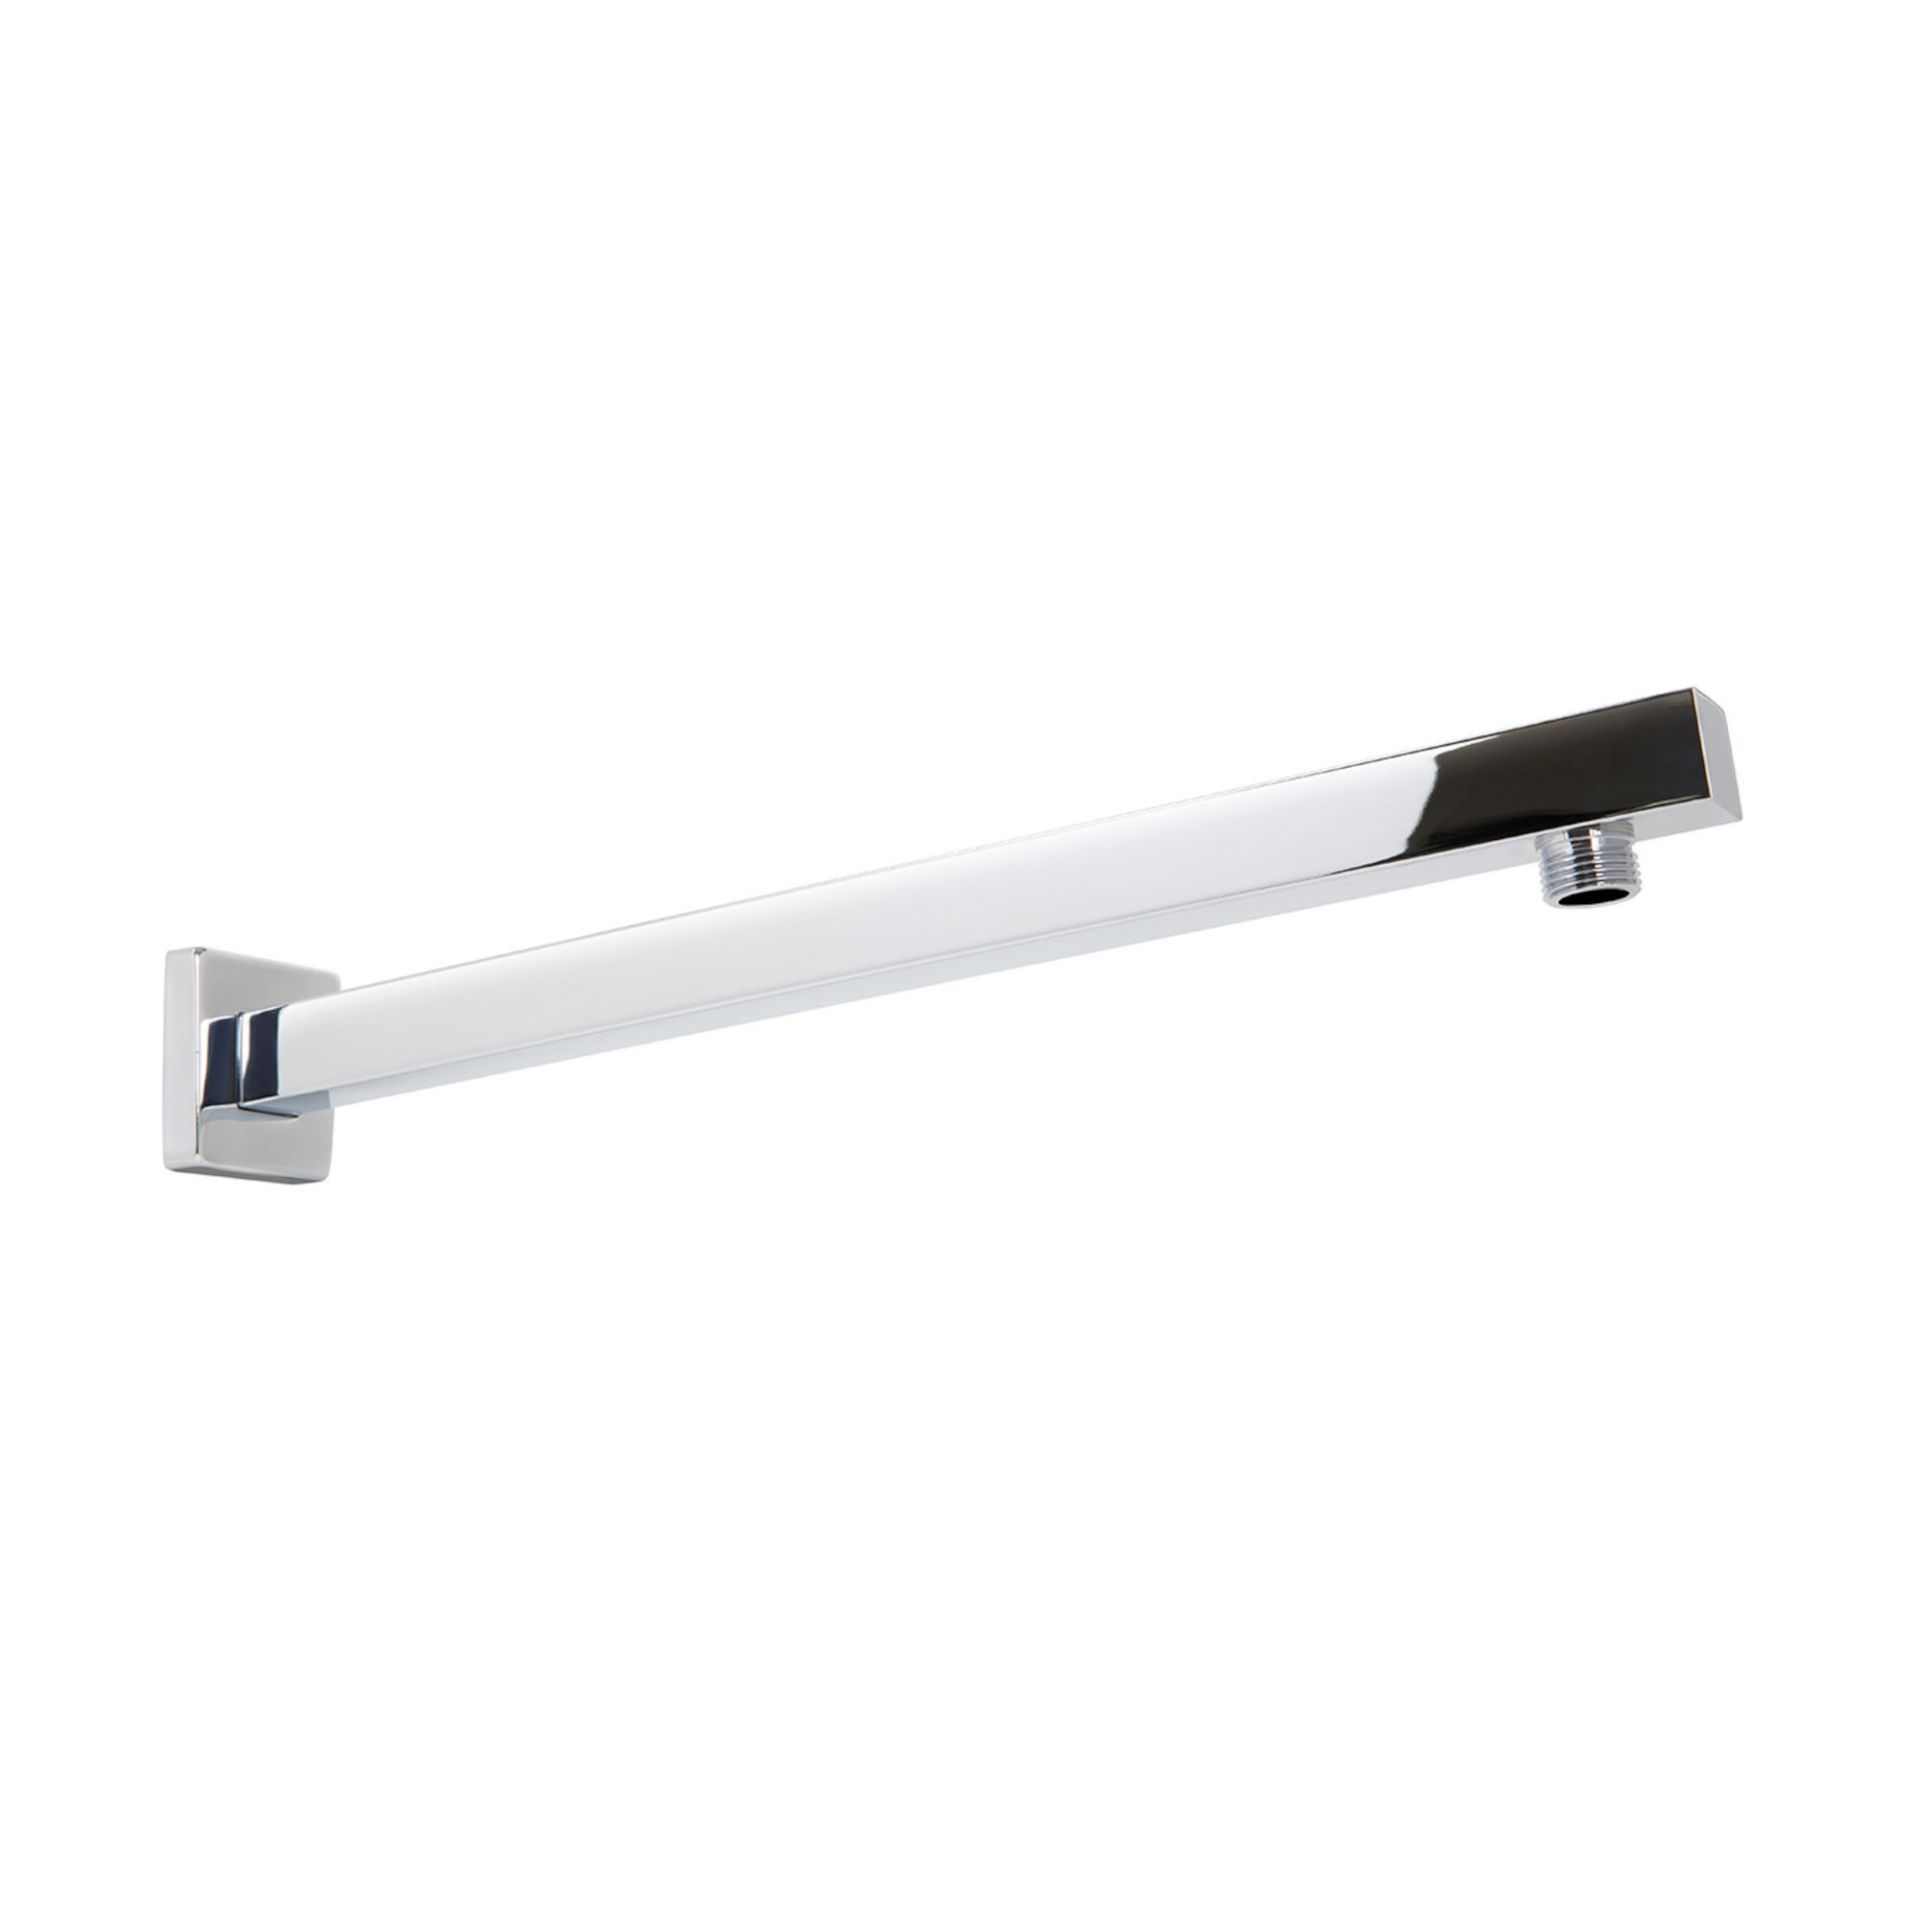 (EE1021) Square Straight Wall Mounted Shower Arm Chrome plated solid brass Standard 1/2 inch ...